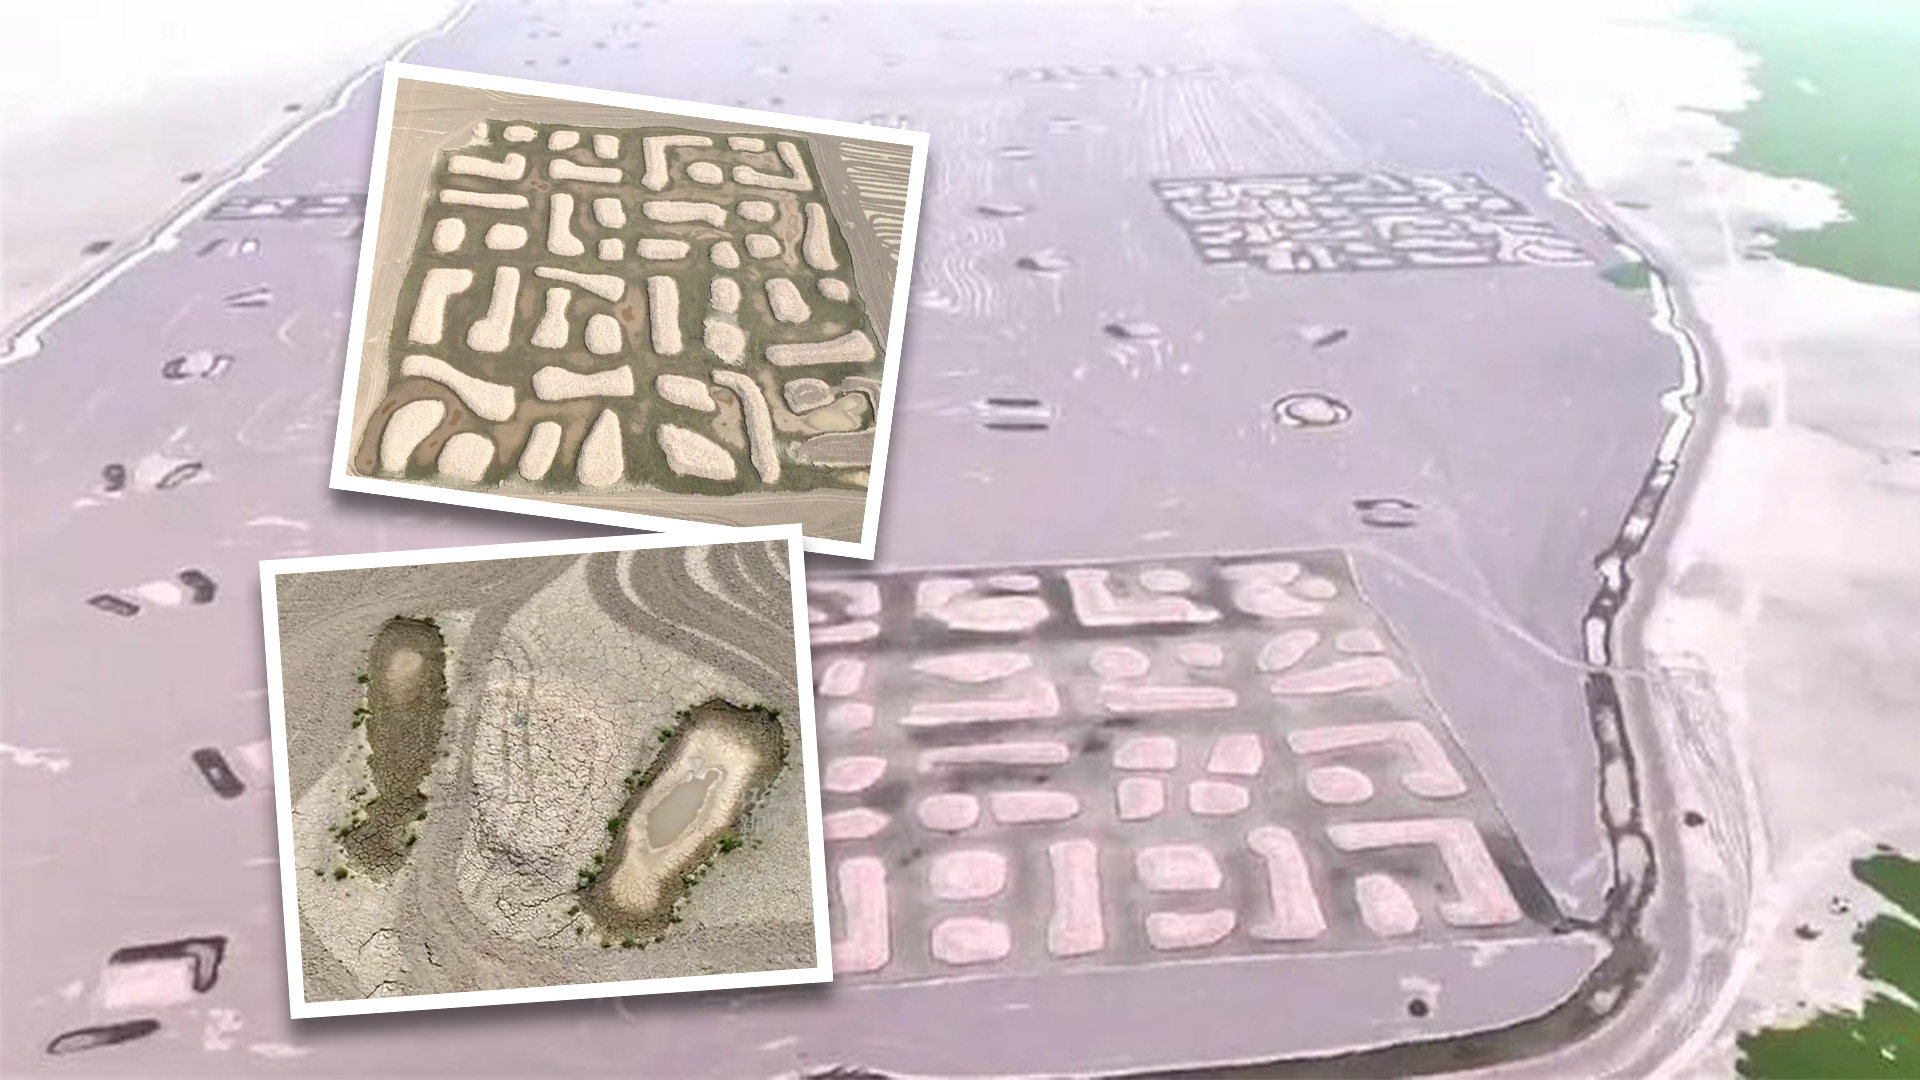 Official explanations about mysterious patterns on a lake floor exposed by drought in China being fish traps don’t stop excited internet users from speculating about aliens. Photo: SCMP composite